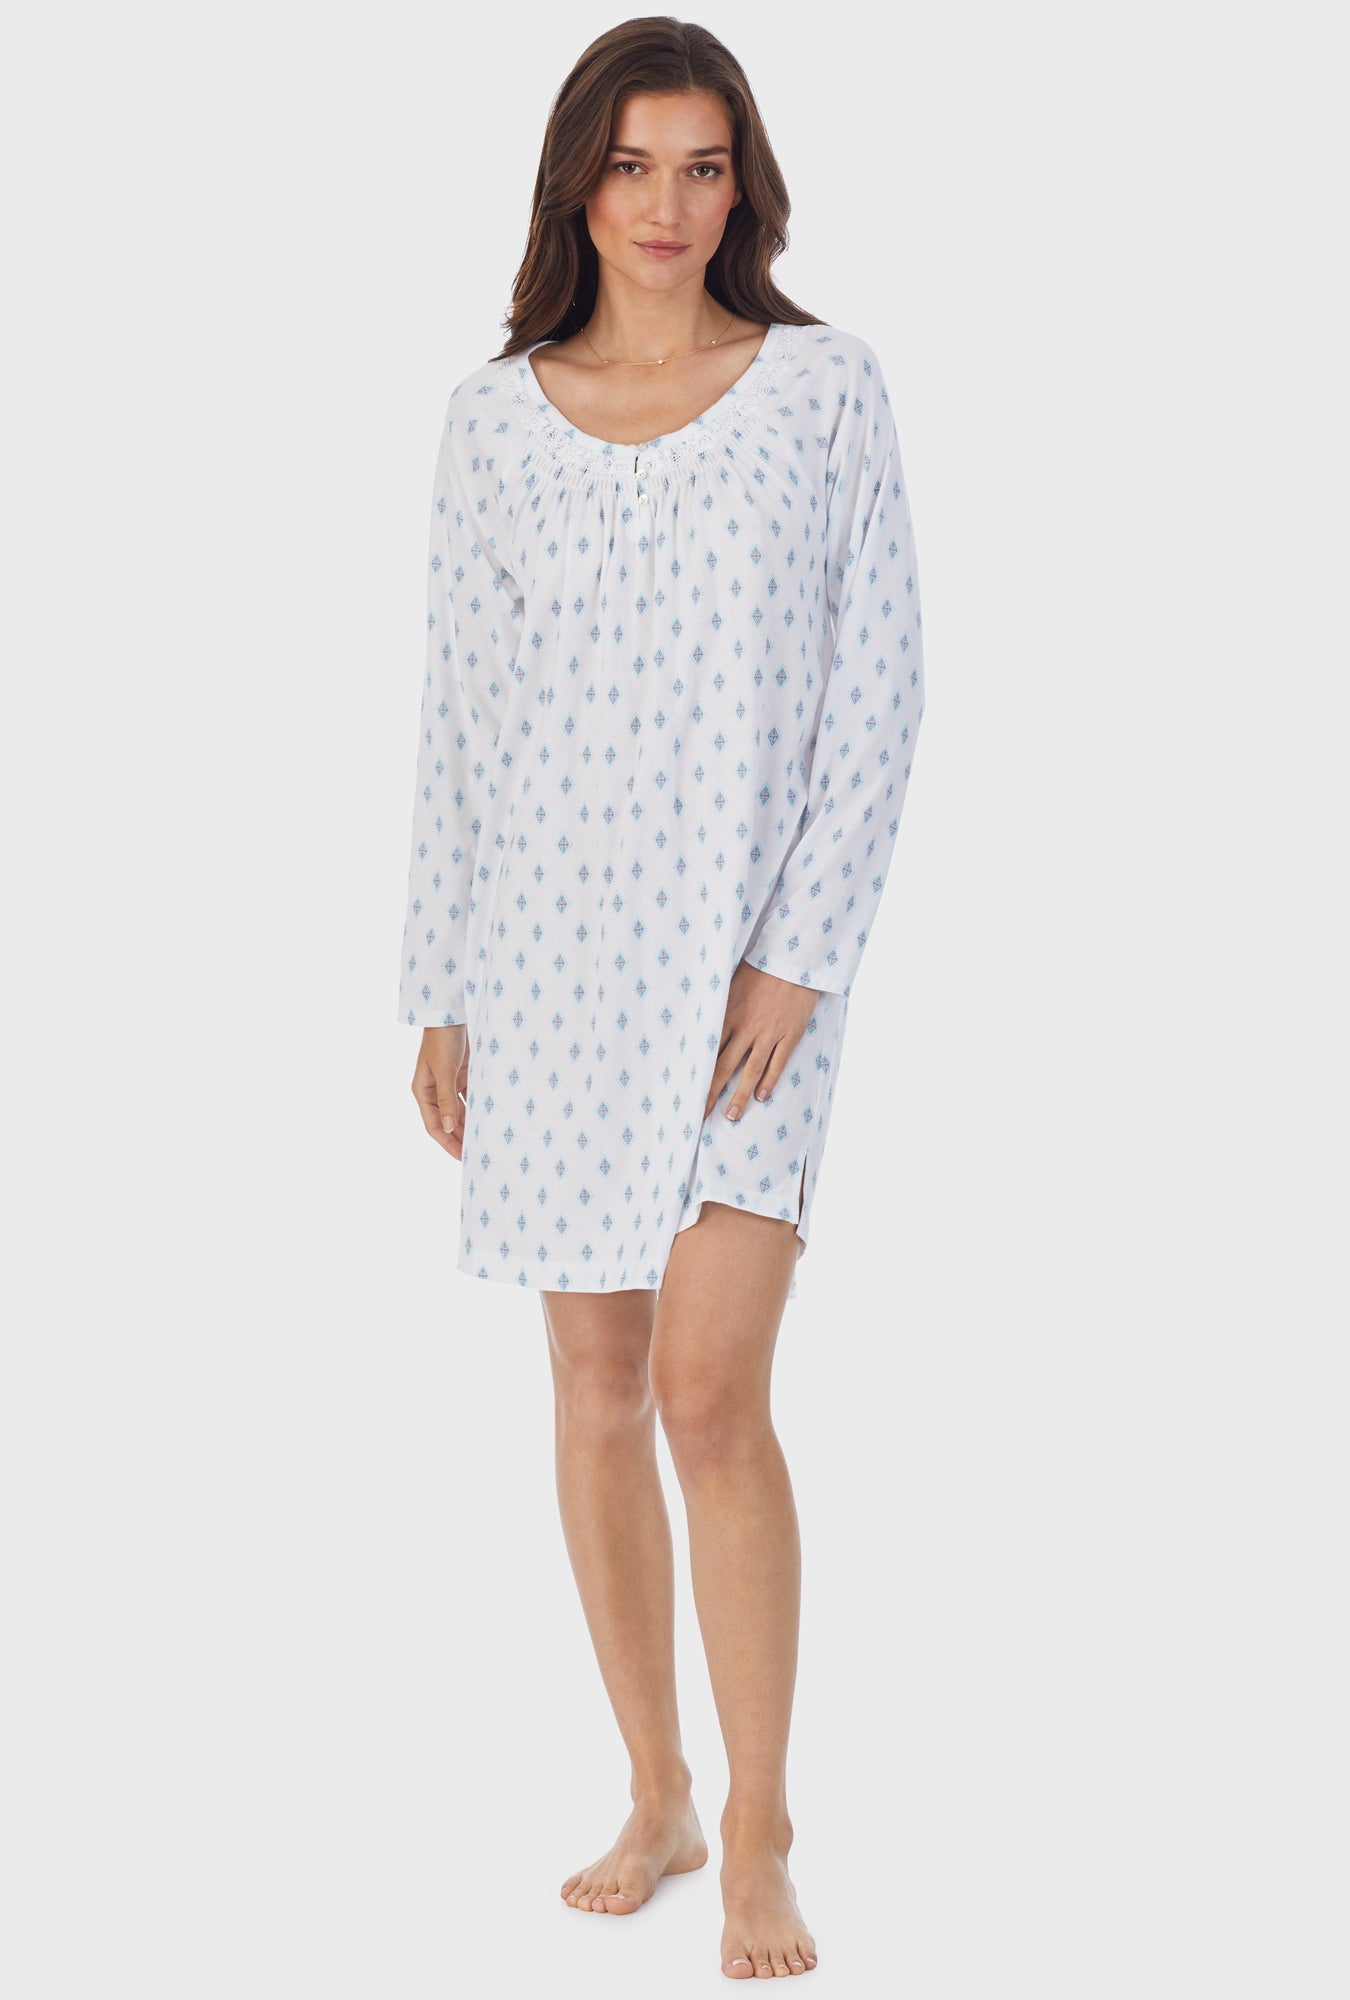 A lady wearing white long sleeve cotton short nightgown with aqua geo print.